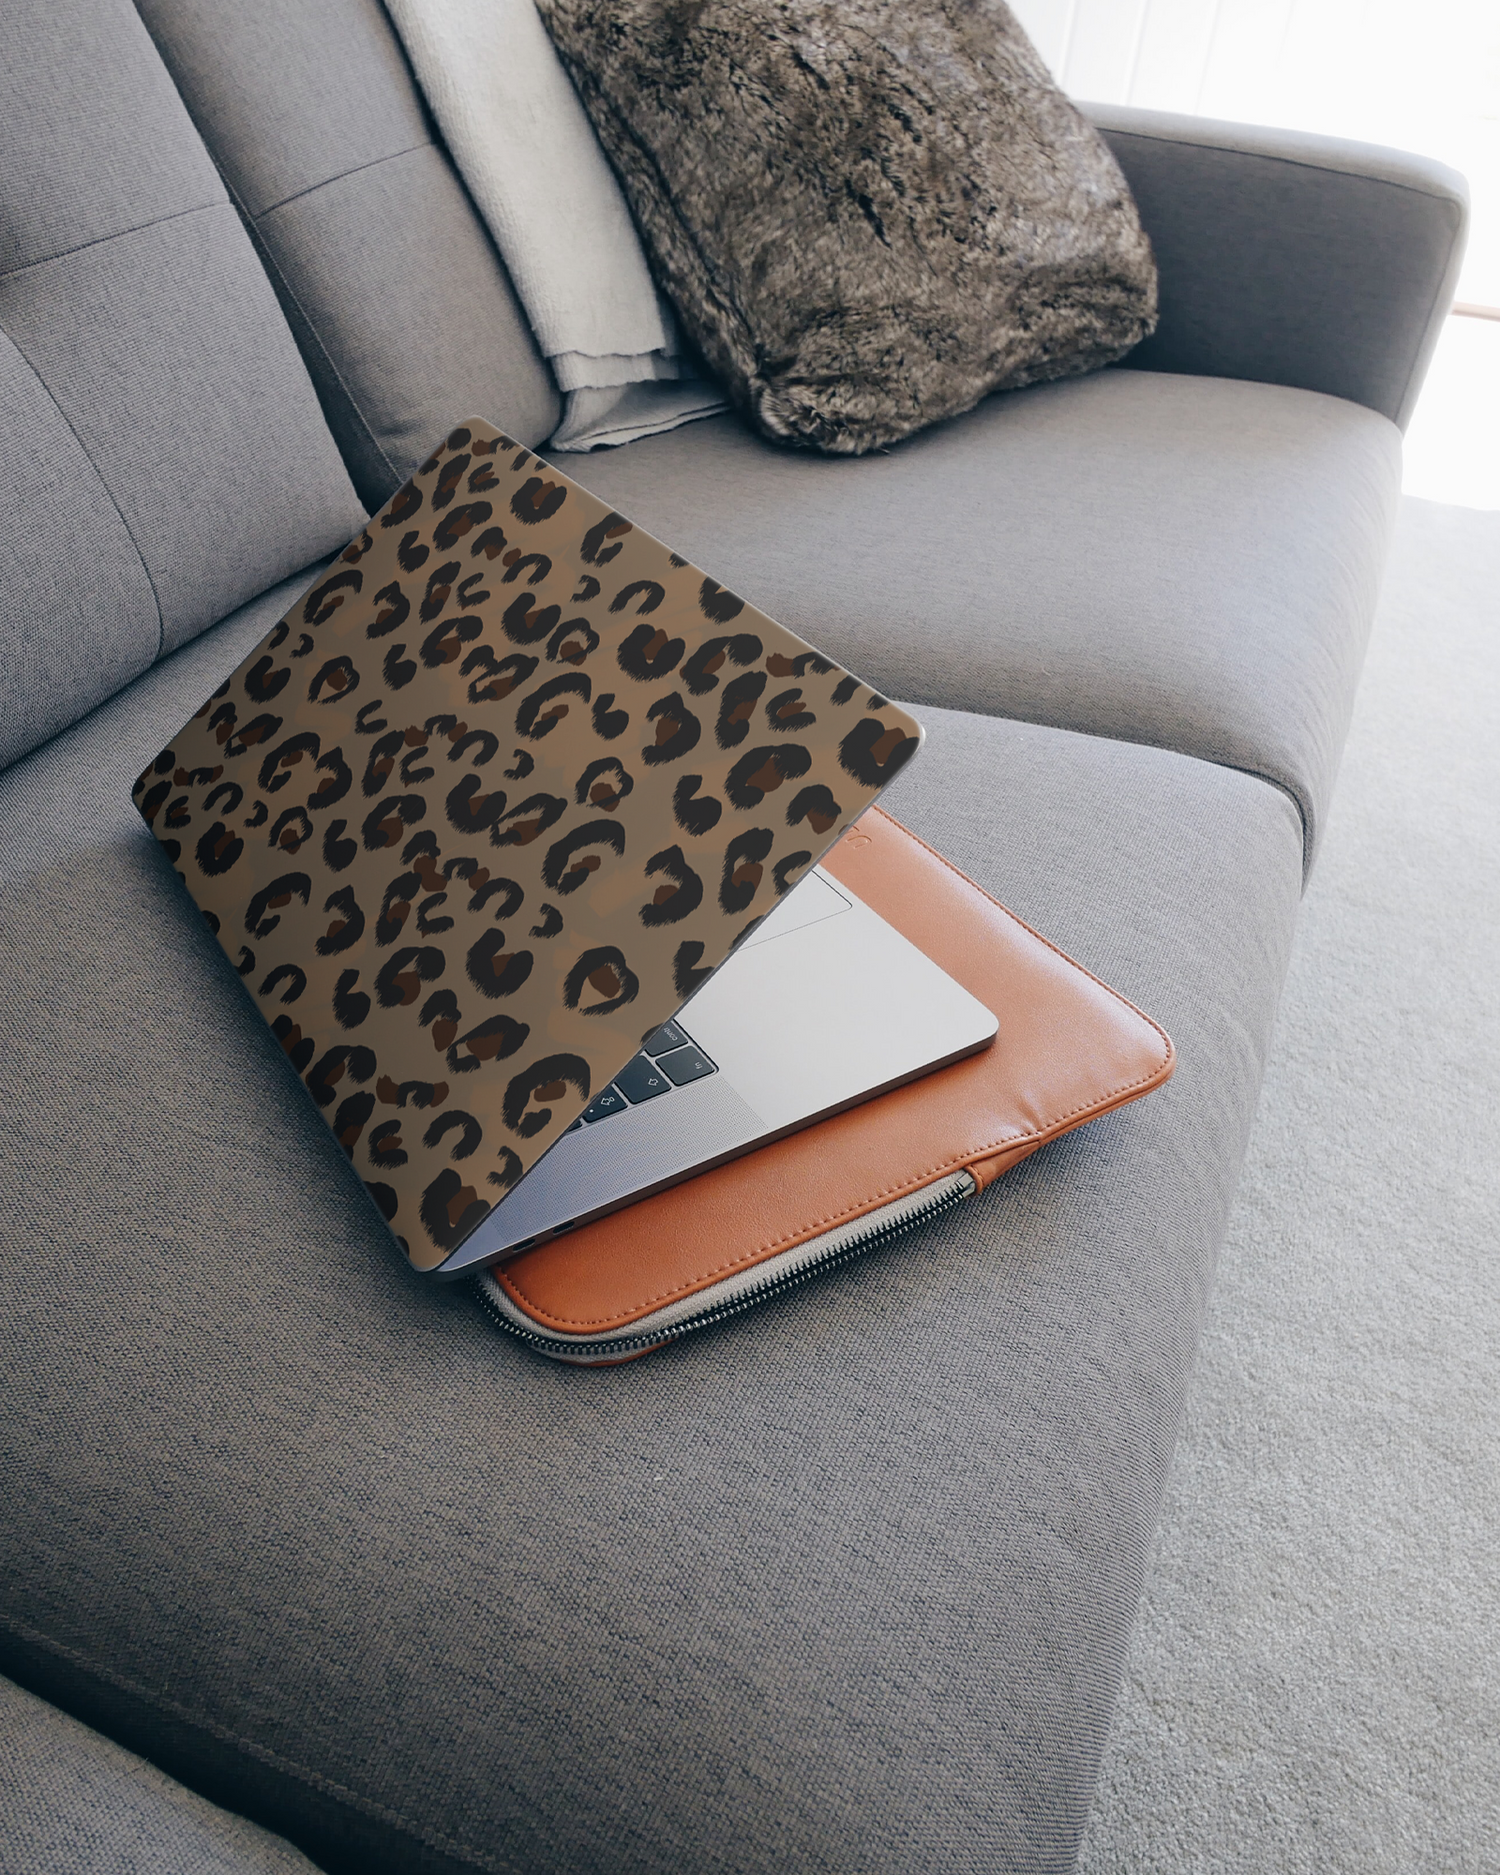 Leopard Repeat Laptop Skin for 15 inch Apple MacBooks on a couch